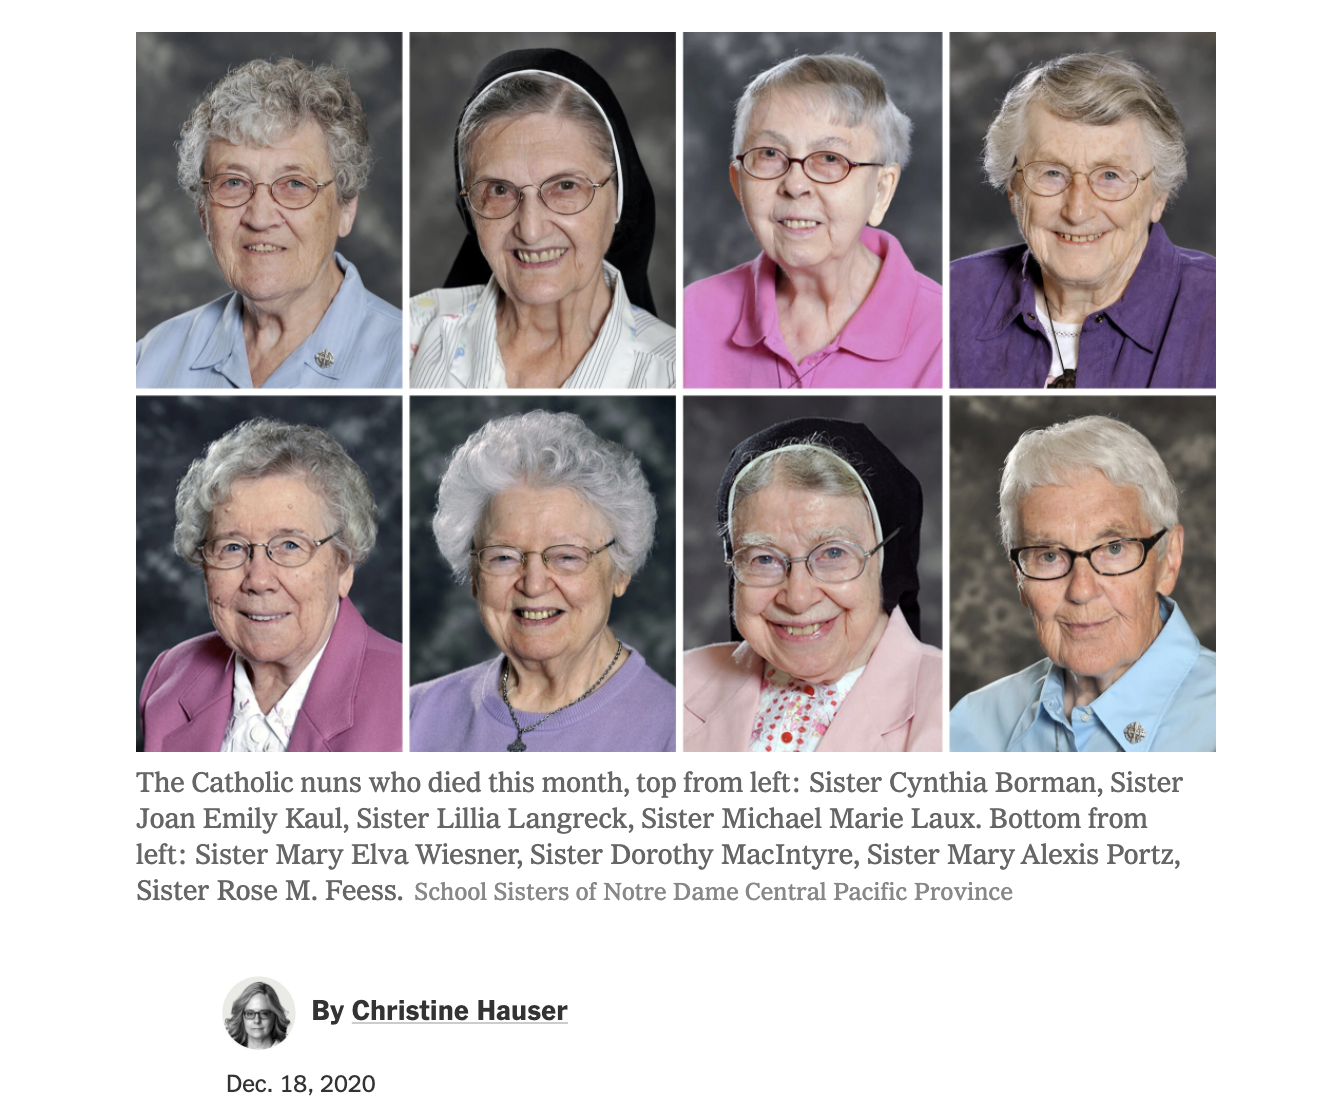 The New York Times published a story Dec. 18 about the eight sisters who died in December from COVID-19. (GSR screenshot)